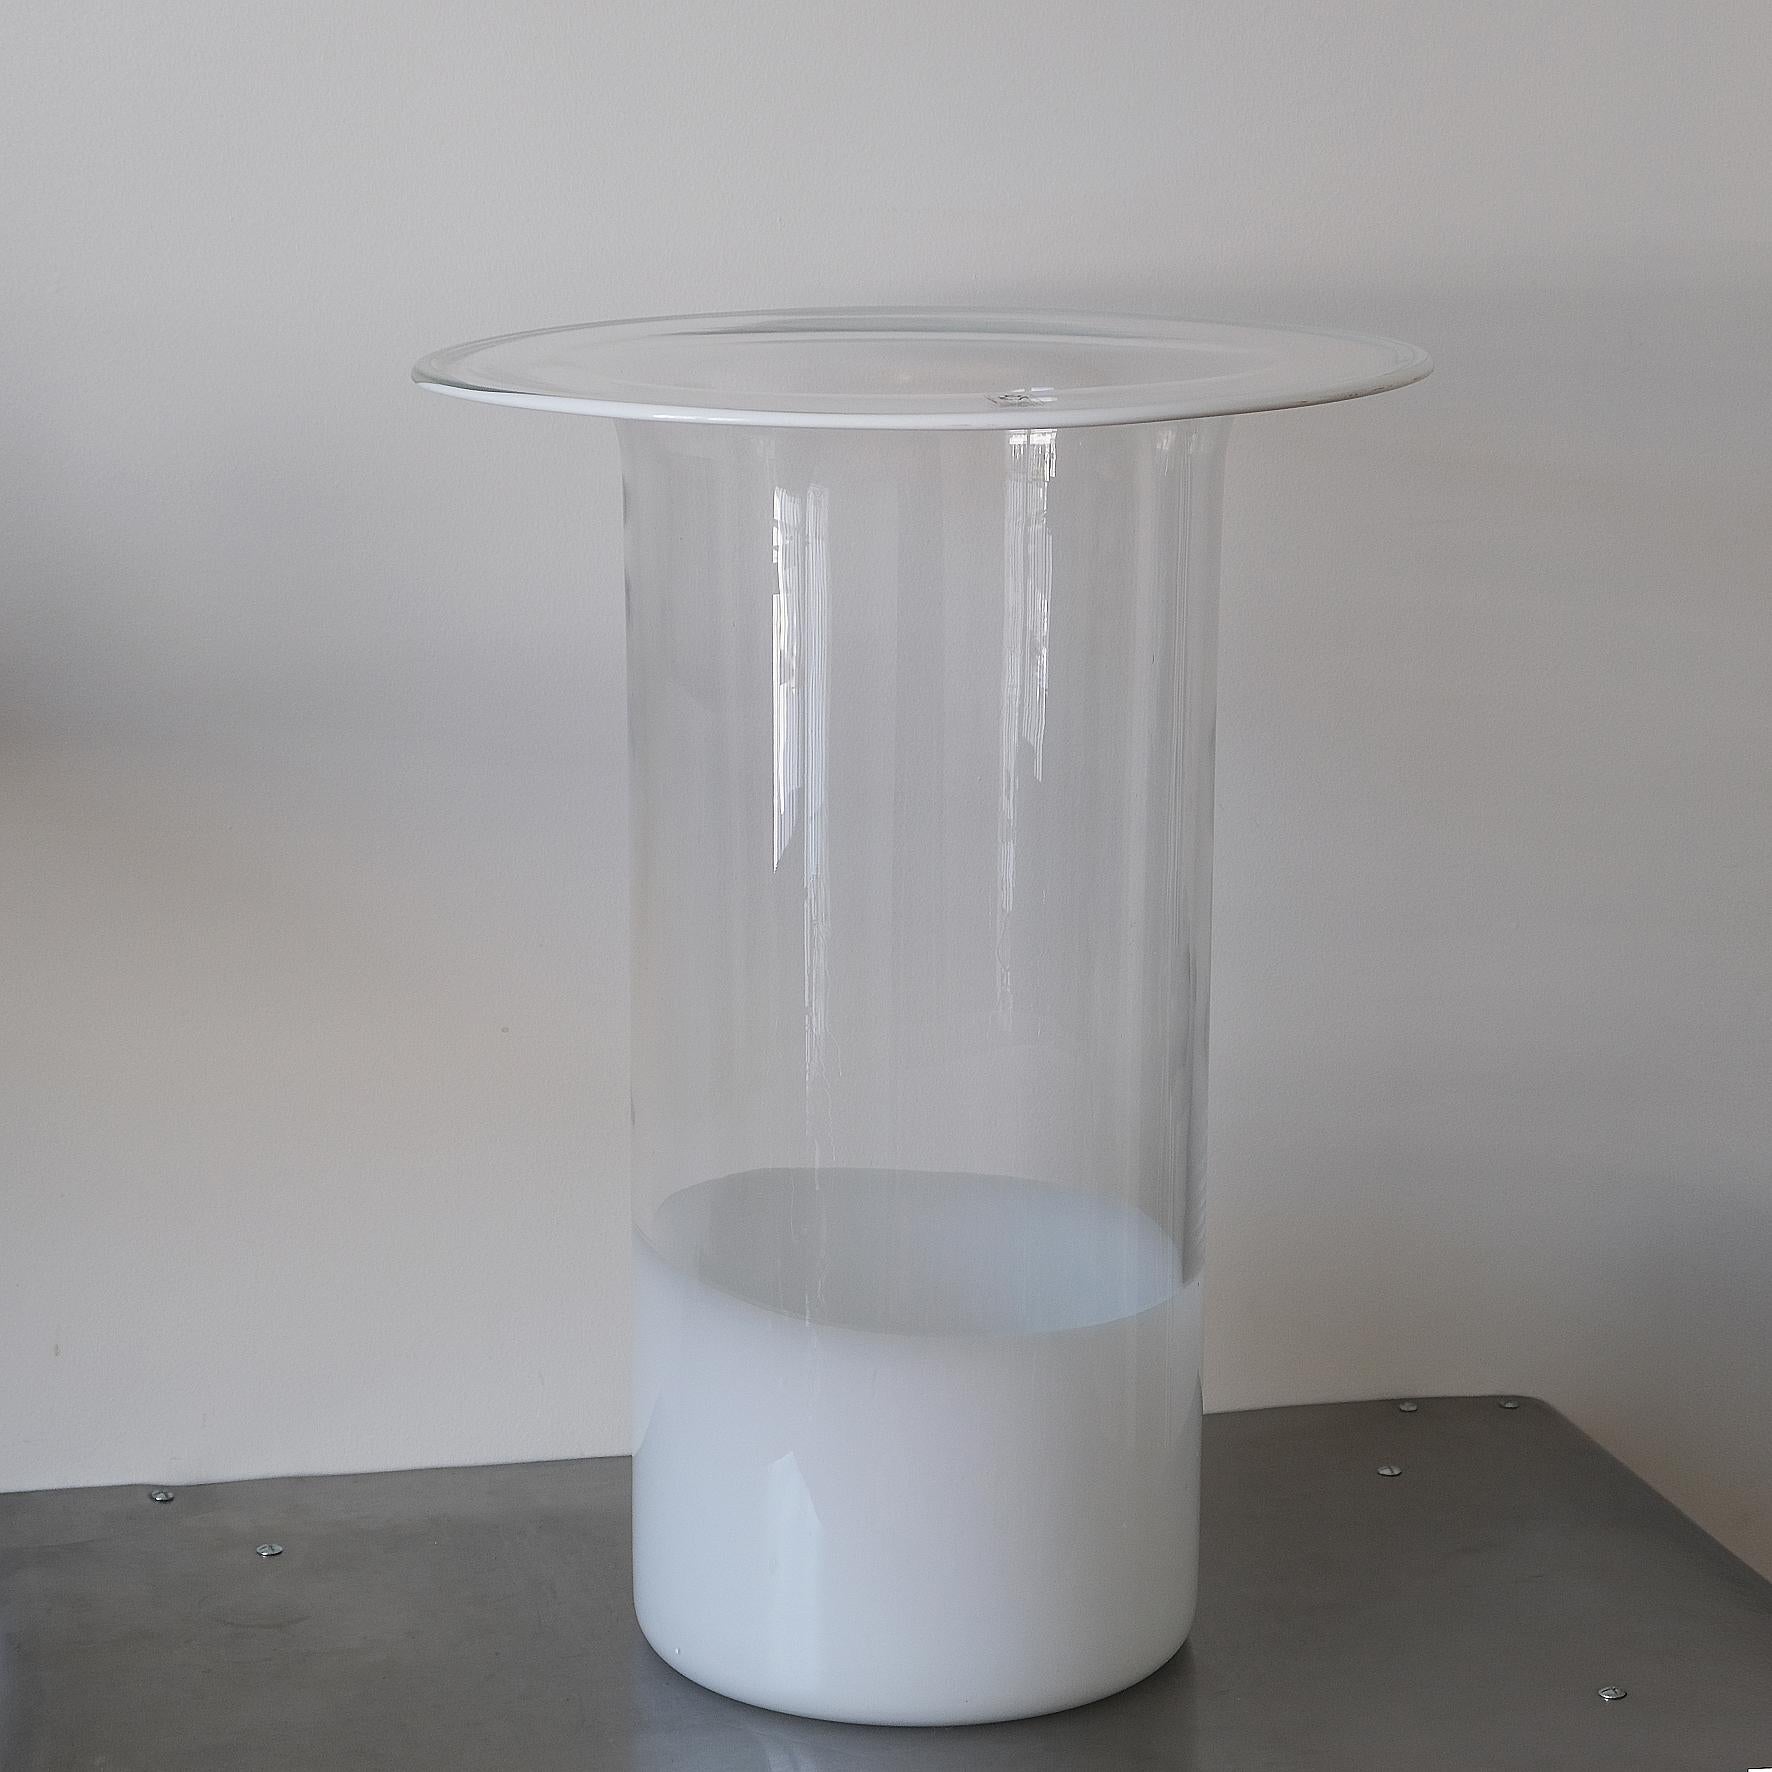 Renato Toso

Chiclos

A beautiful and tall blown glass vase, the white and transparent cylinder body 
terminated with a spreading circular rim.
Produced by Leucos, Italy.
Circa 1968.

Dimensions
Height: 56.5 cm 
Diameter: 42 cm
Inside